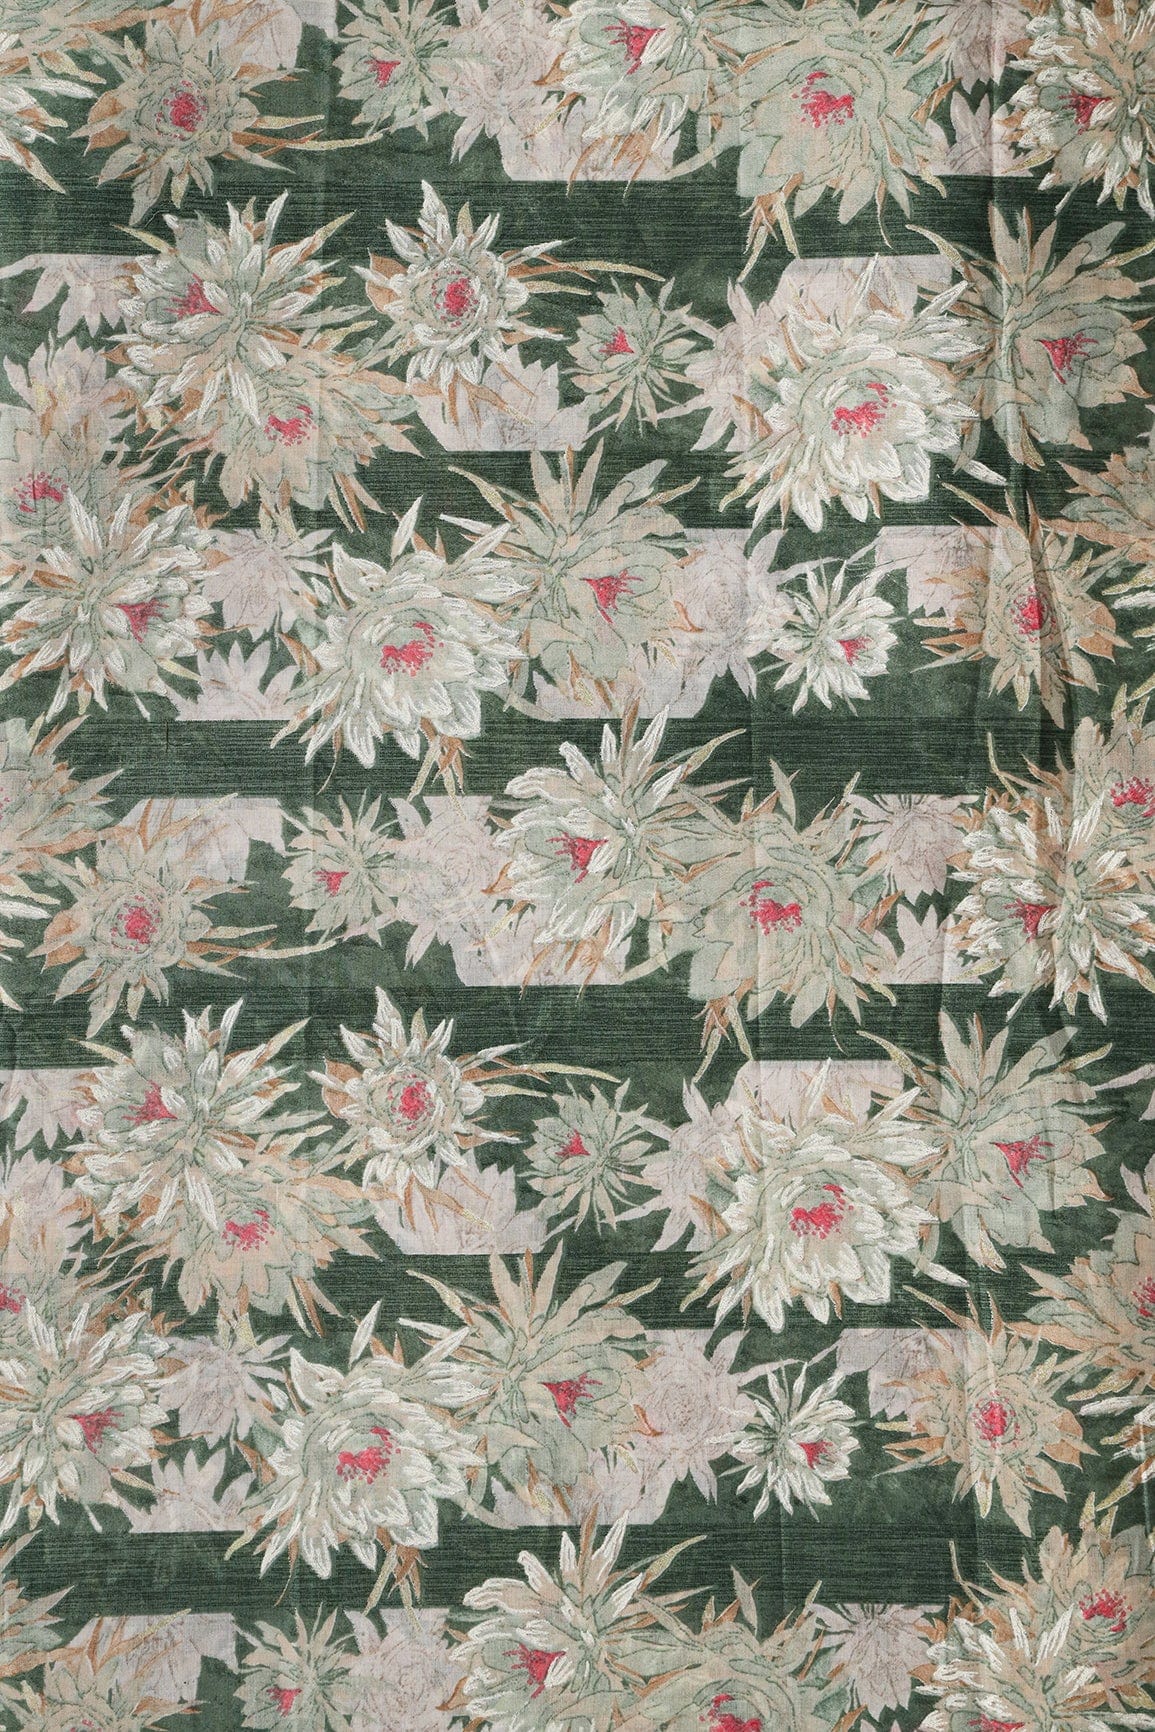 doeraa Prints White And Light Green Floral Foil Print On Green Pure Mul Cotton Fabric